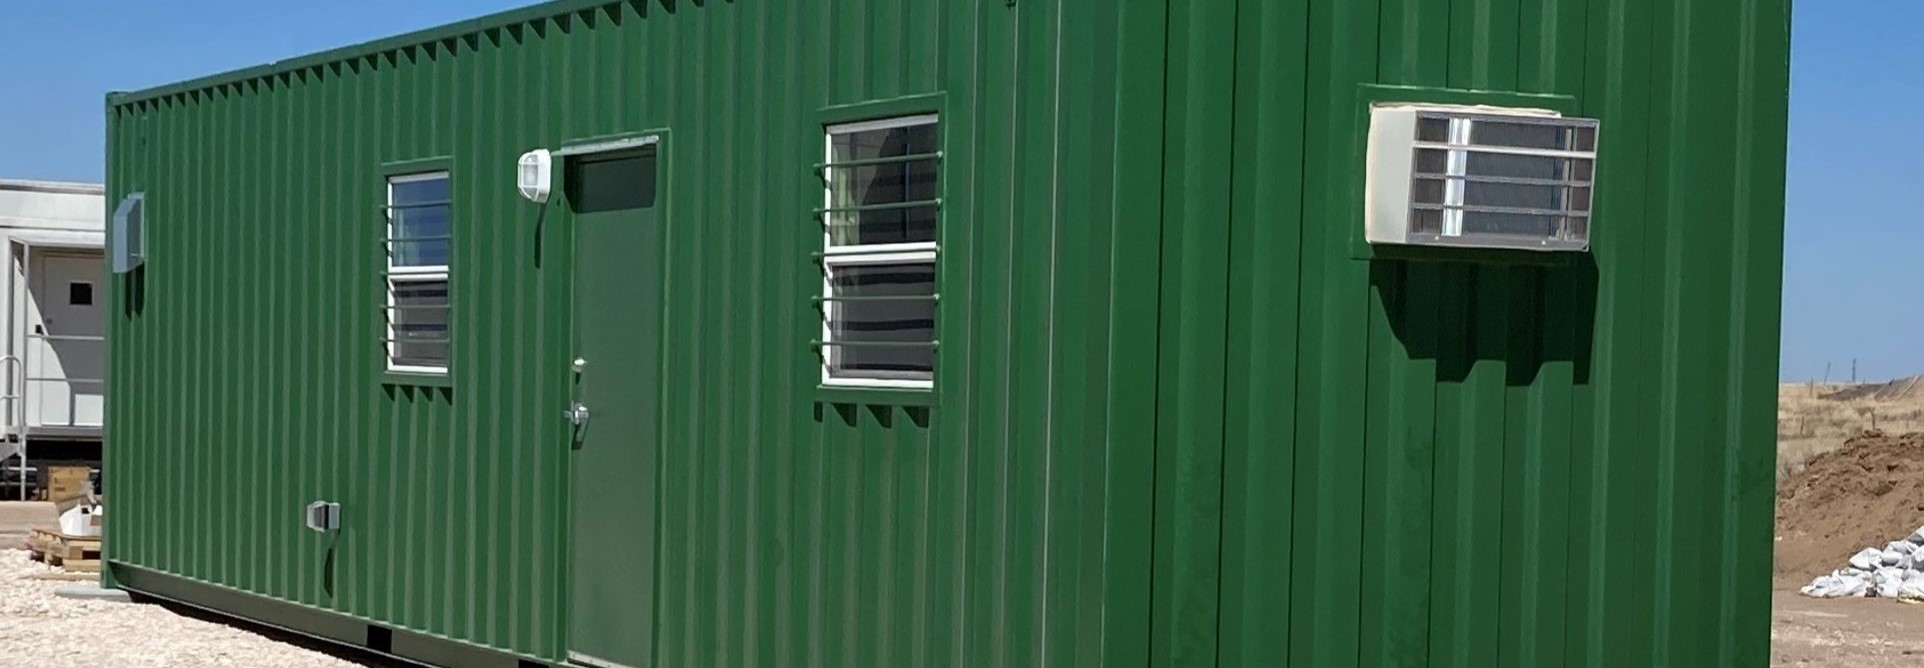 Green_40ft_container